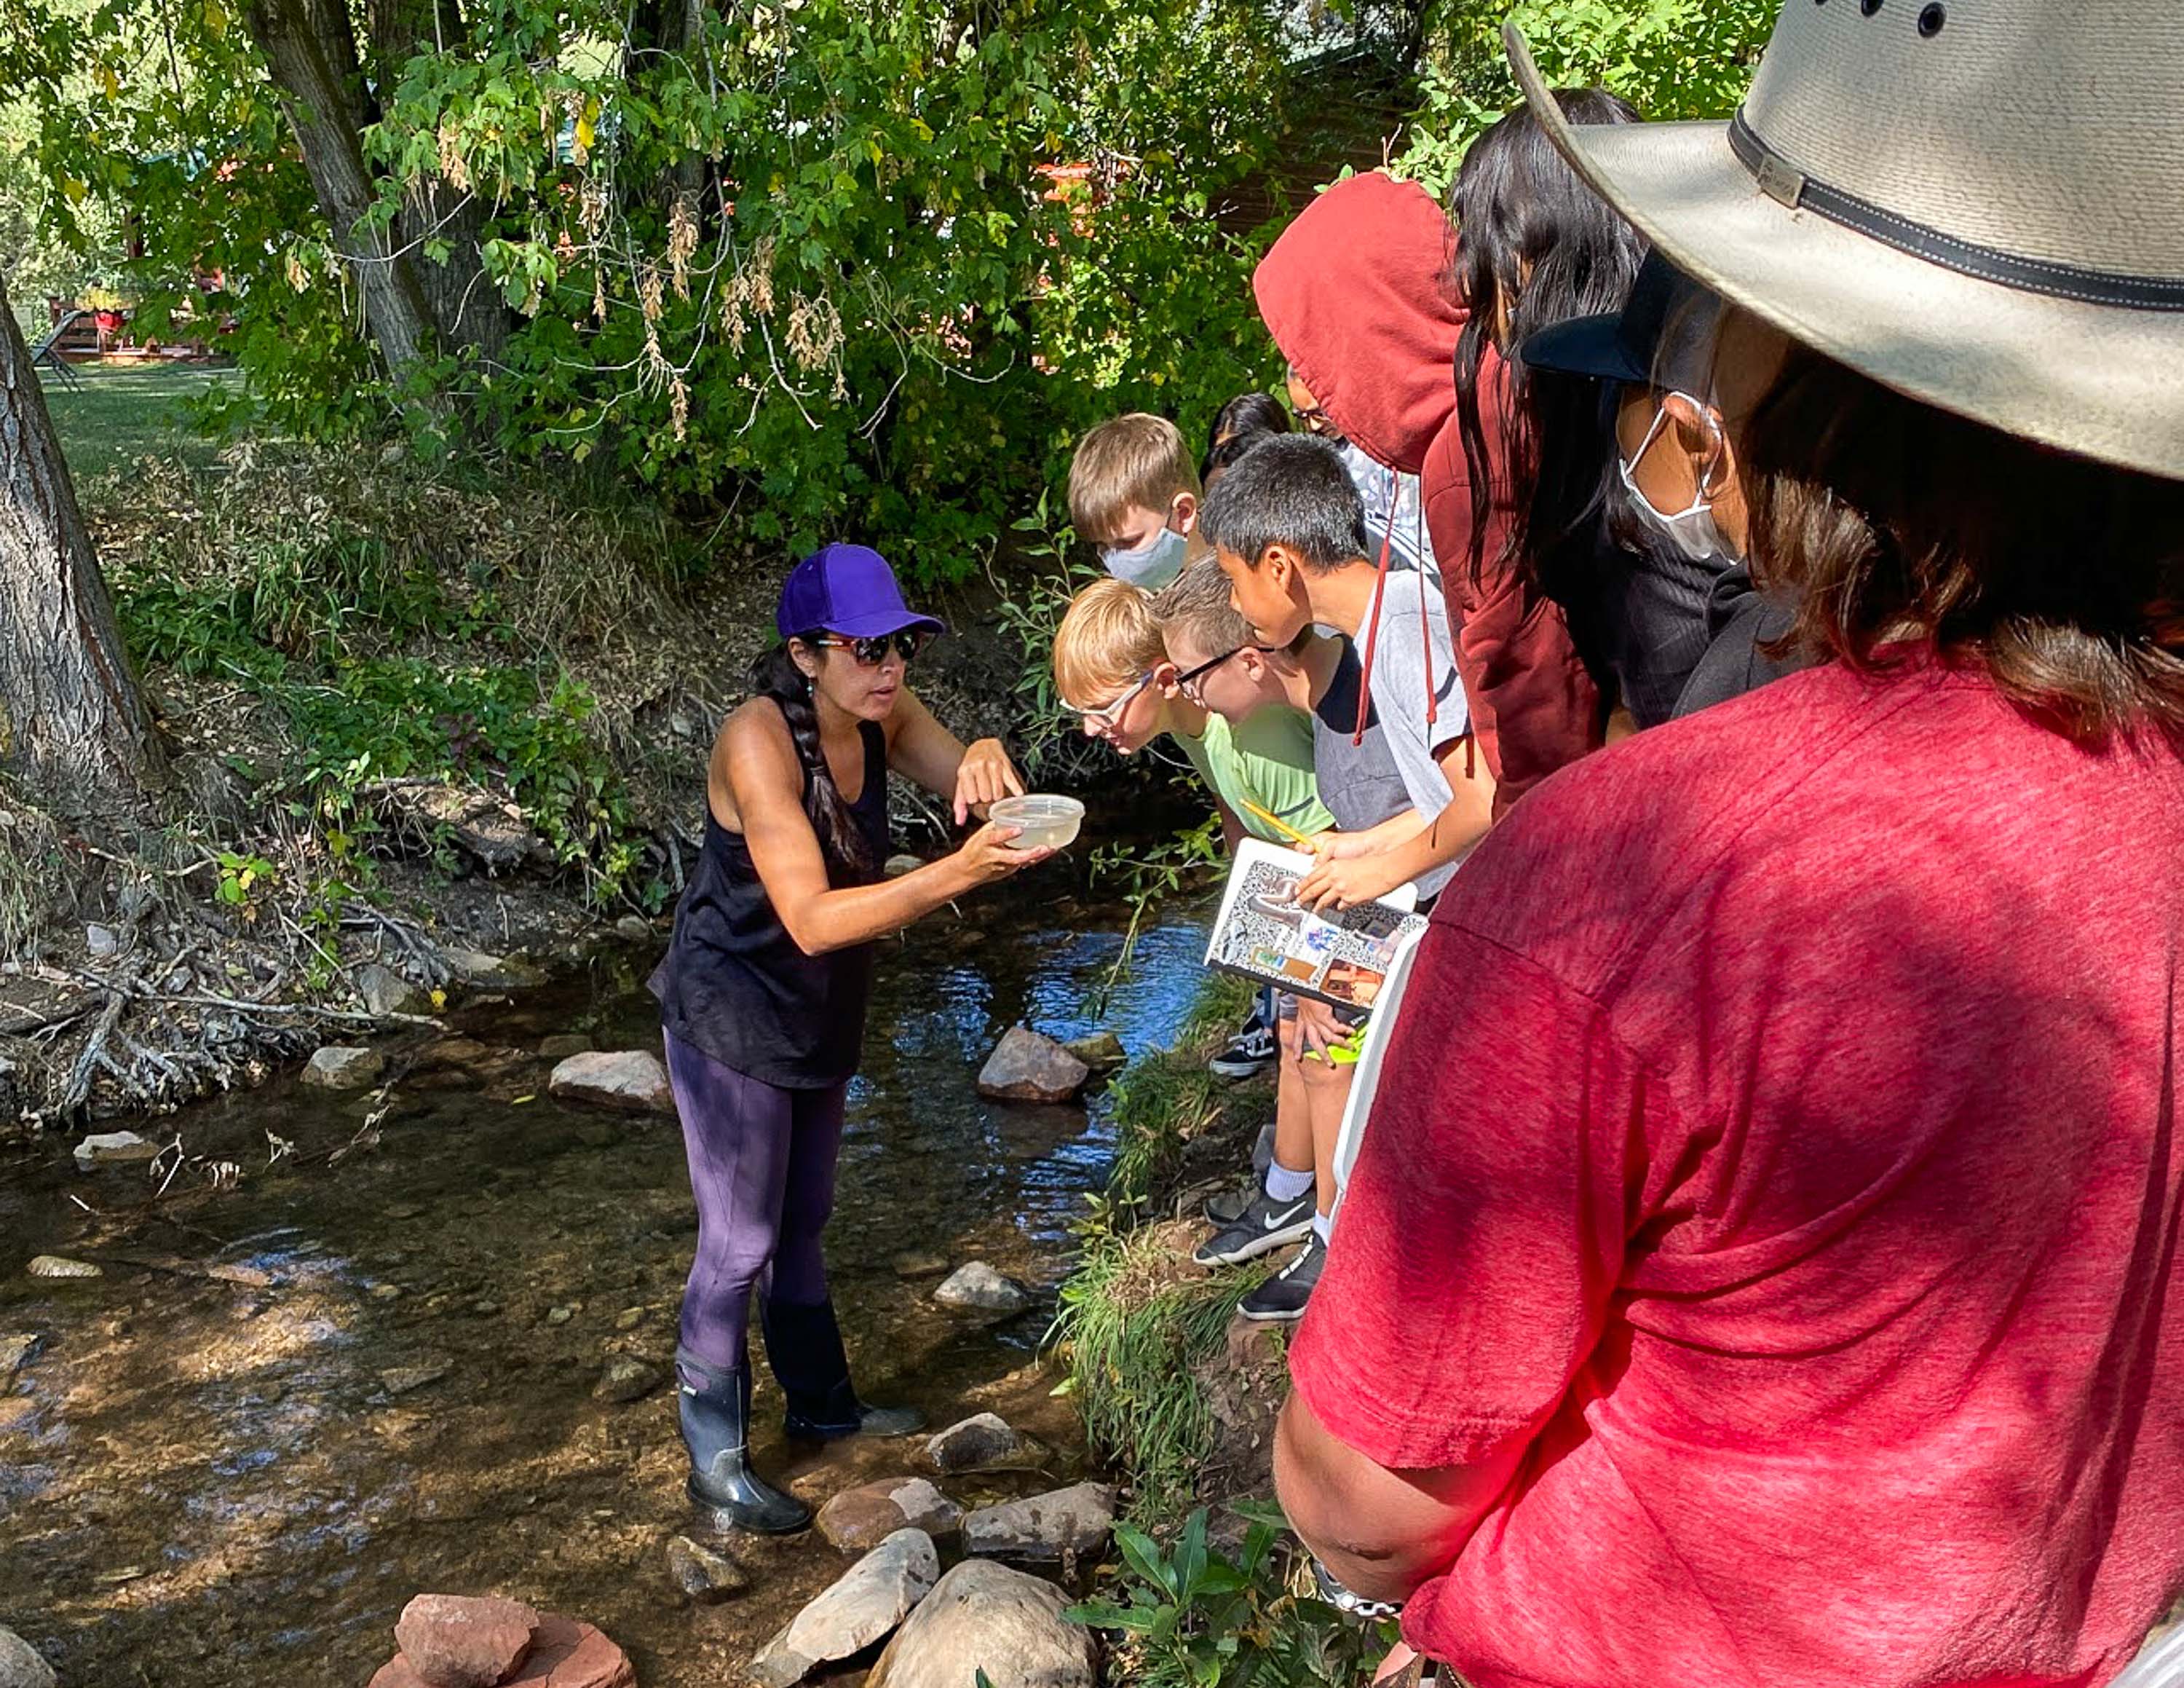 A teacher works with her students at a creek, with her children looking at something she is holding in a small container.